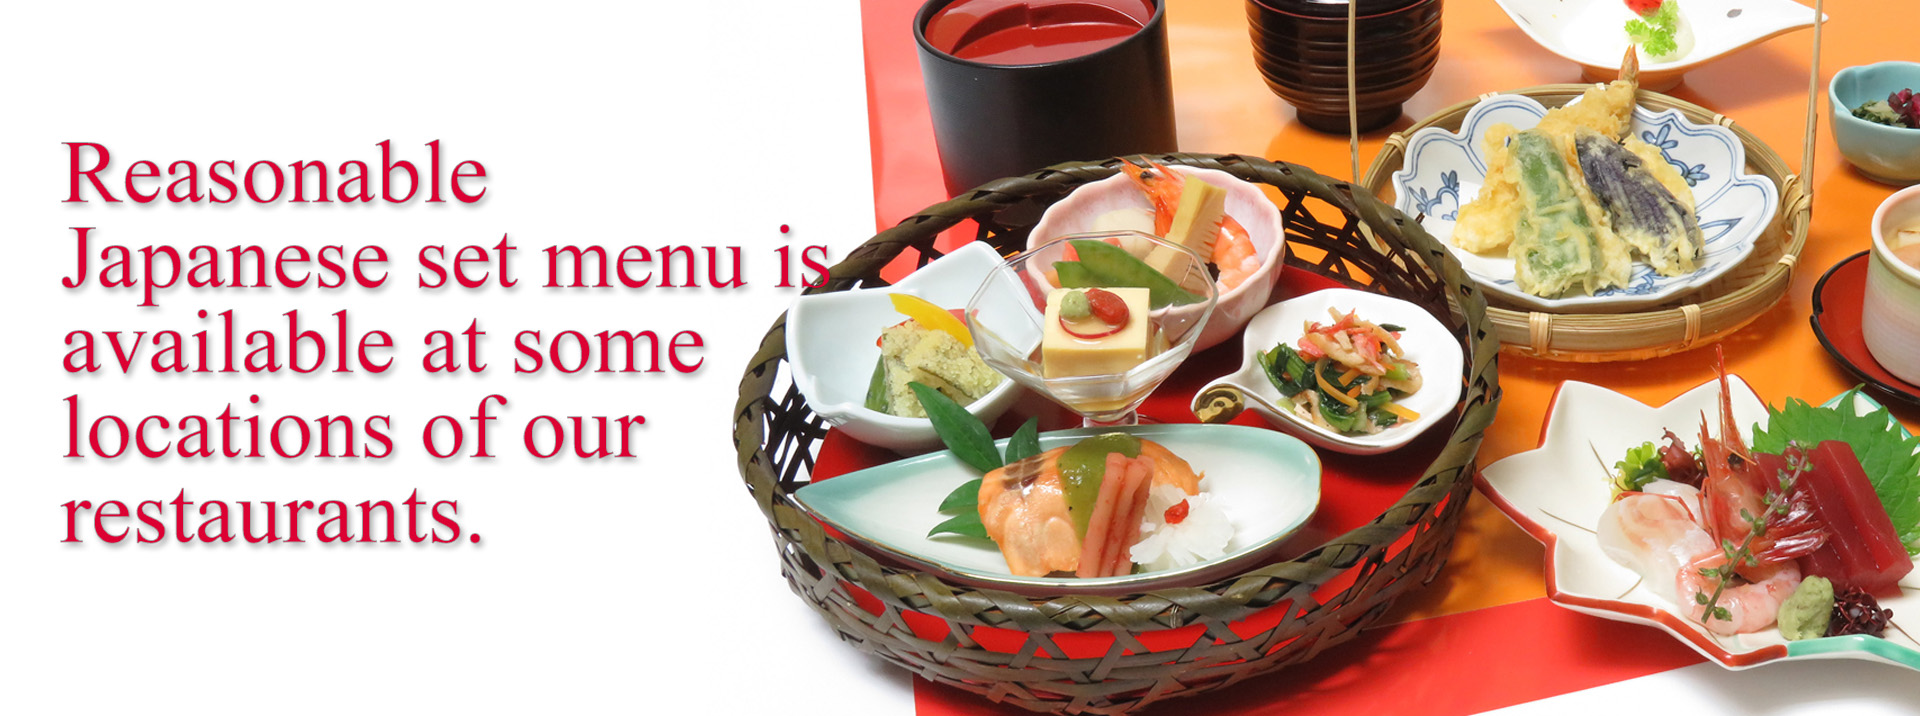 Reasonable Japanese set menu is available at some locations of our restaurants.